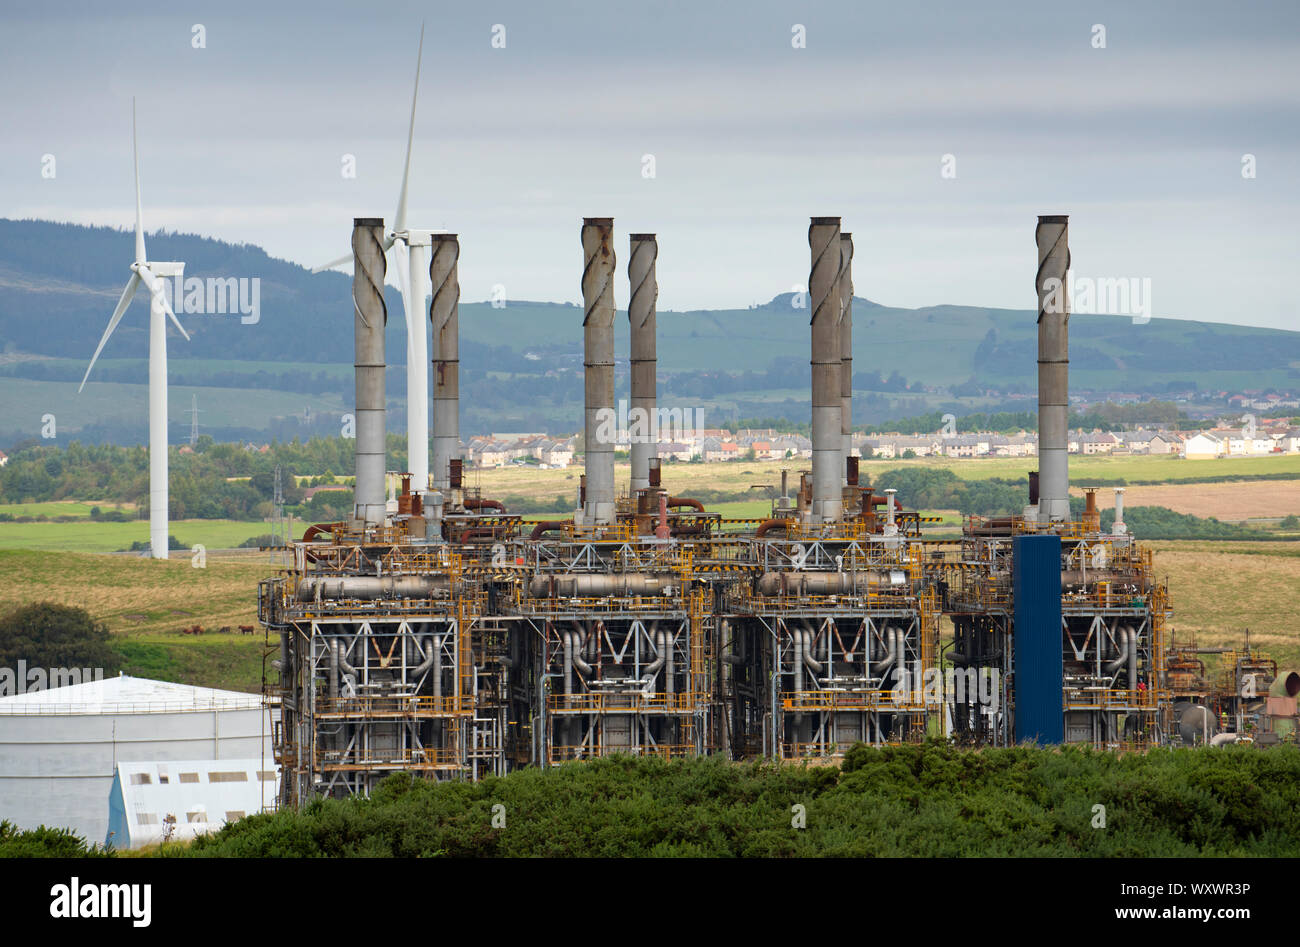 View Mossmorran NGL ethylene plant on 18th September 2019 in Fife, Scotland, UK. The plant is jointly operated by ExxonMobil and Shell UK. Public have Stock Photo